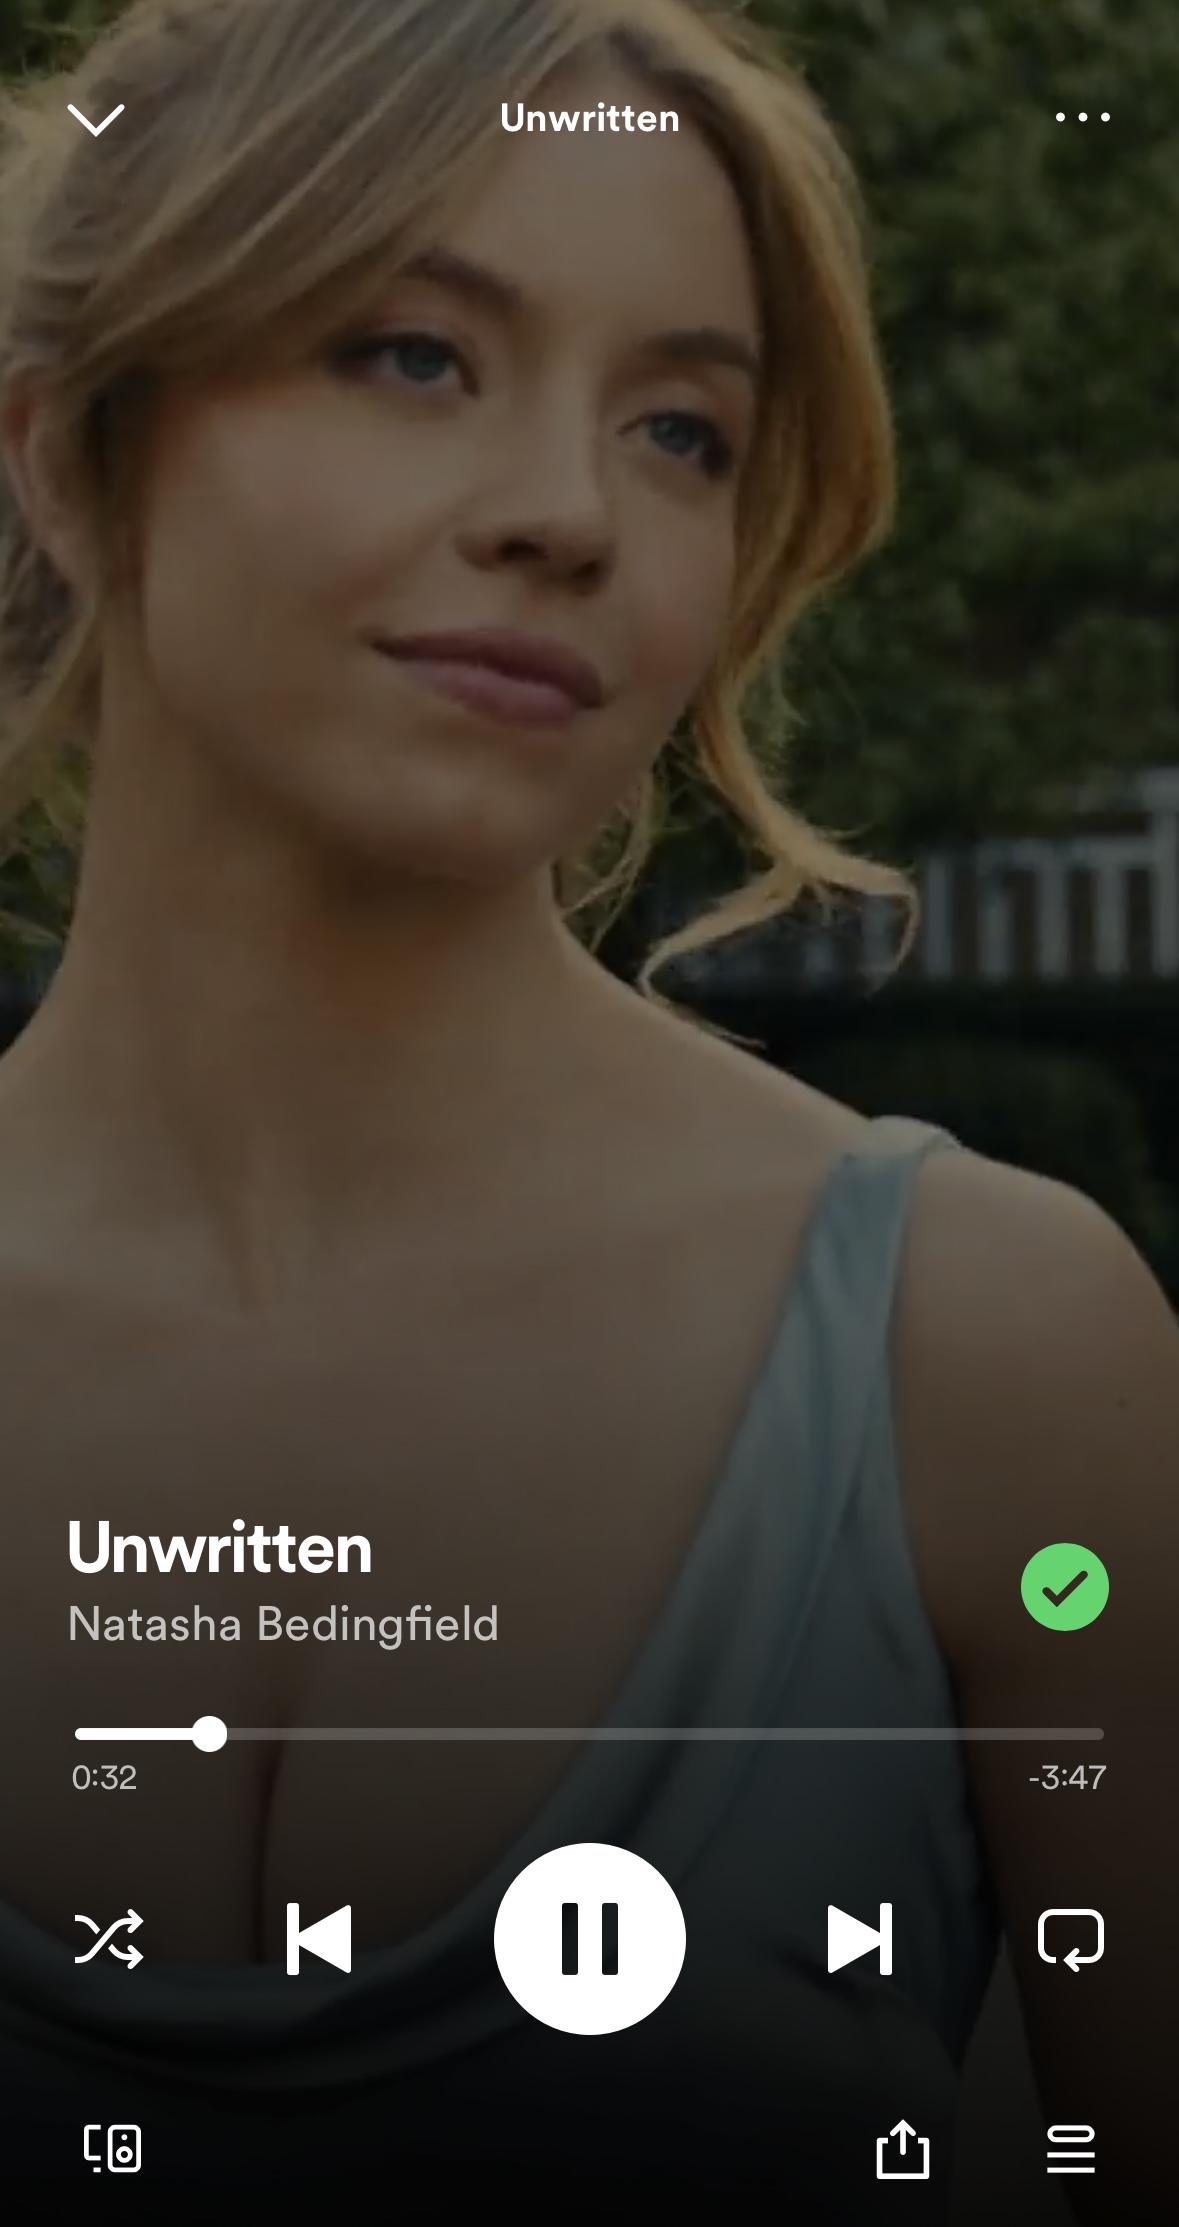 The Spotify canvas for Natasha Bedingfield's Unwritten featuring clips from the film Anyone But You